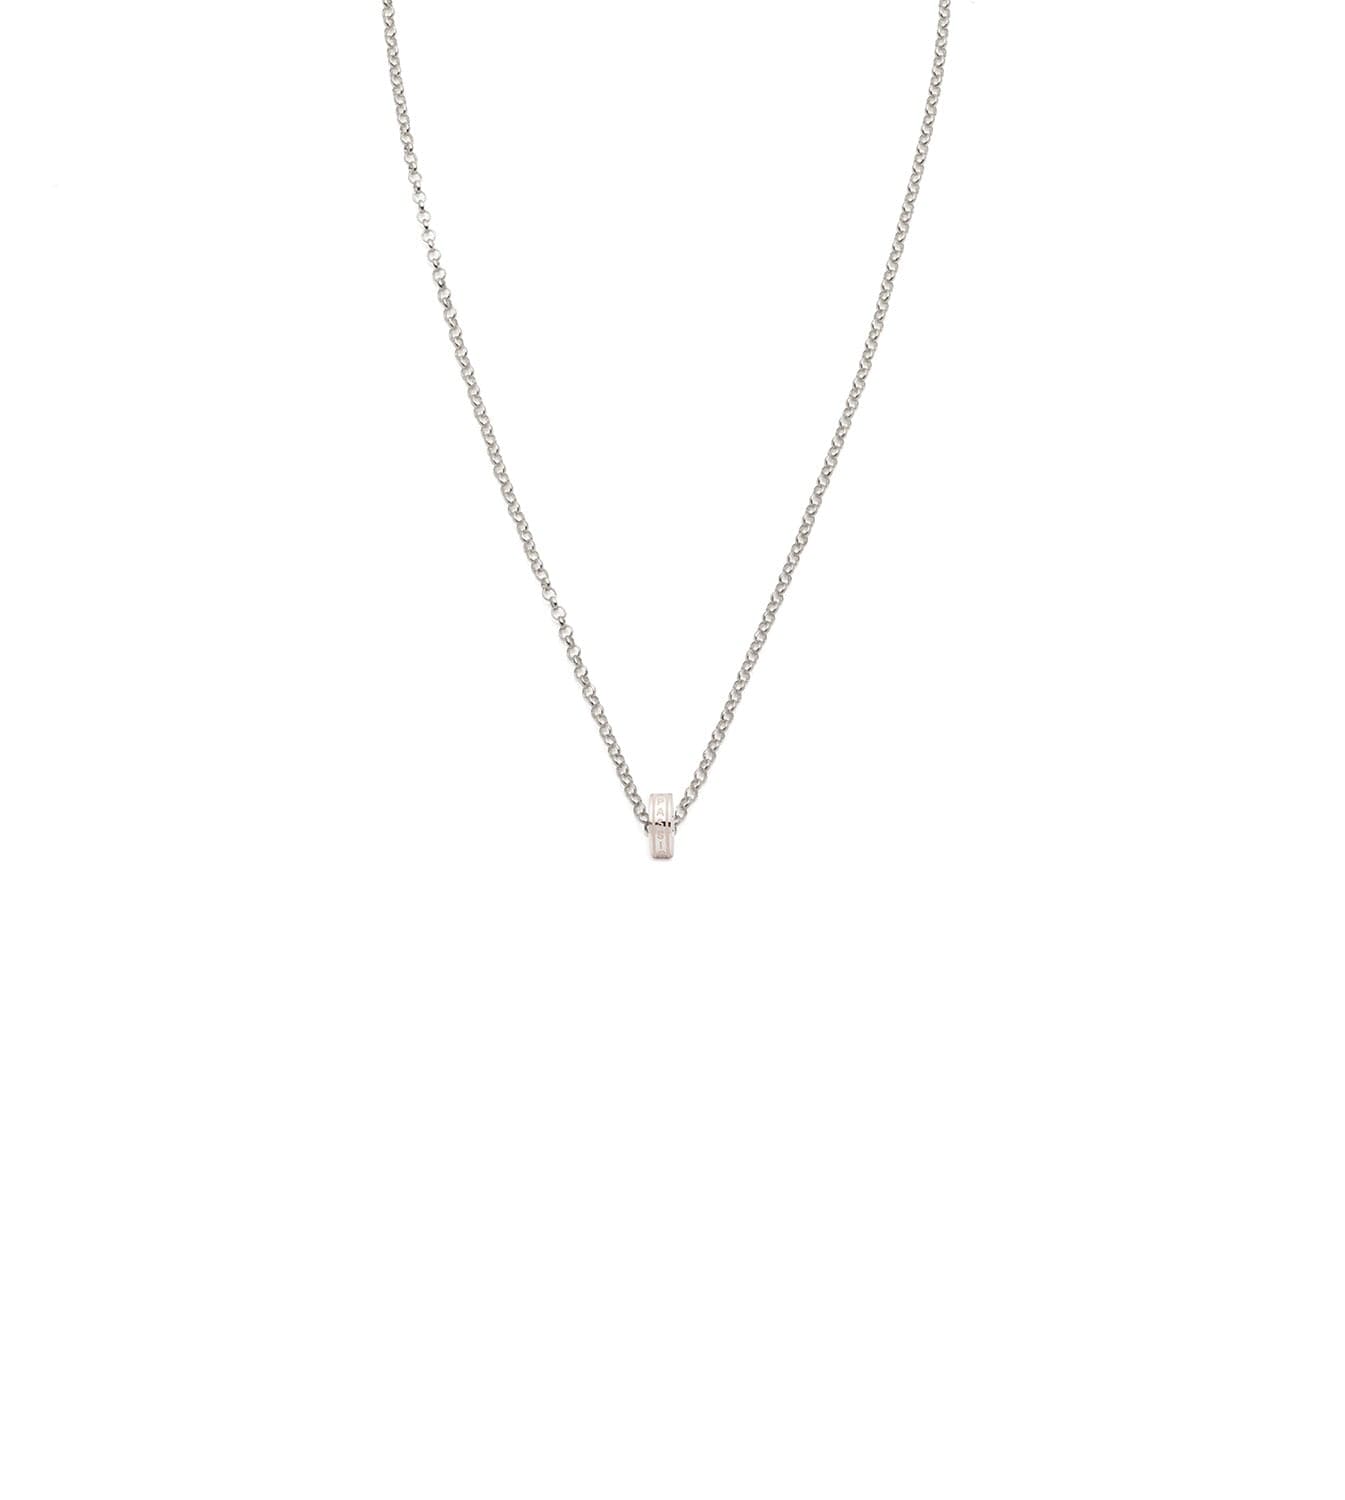 Live Passionately : Heart Beat Fine Belcher Chain Necklace White Gold